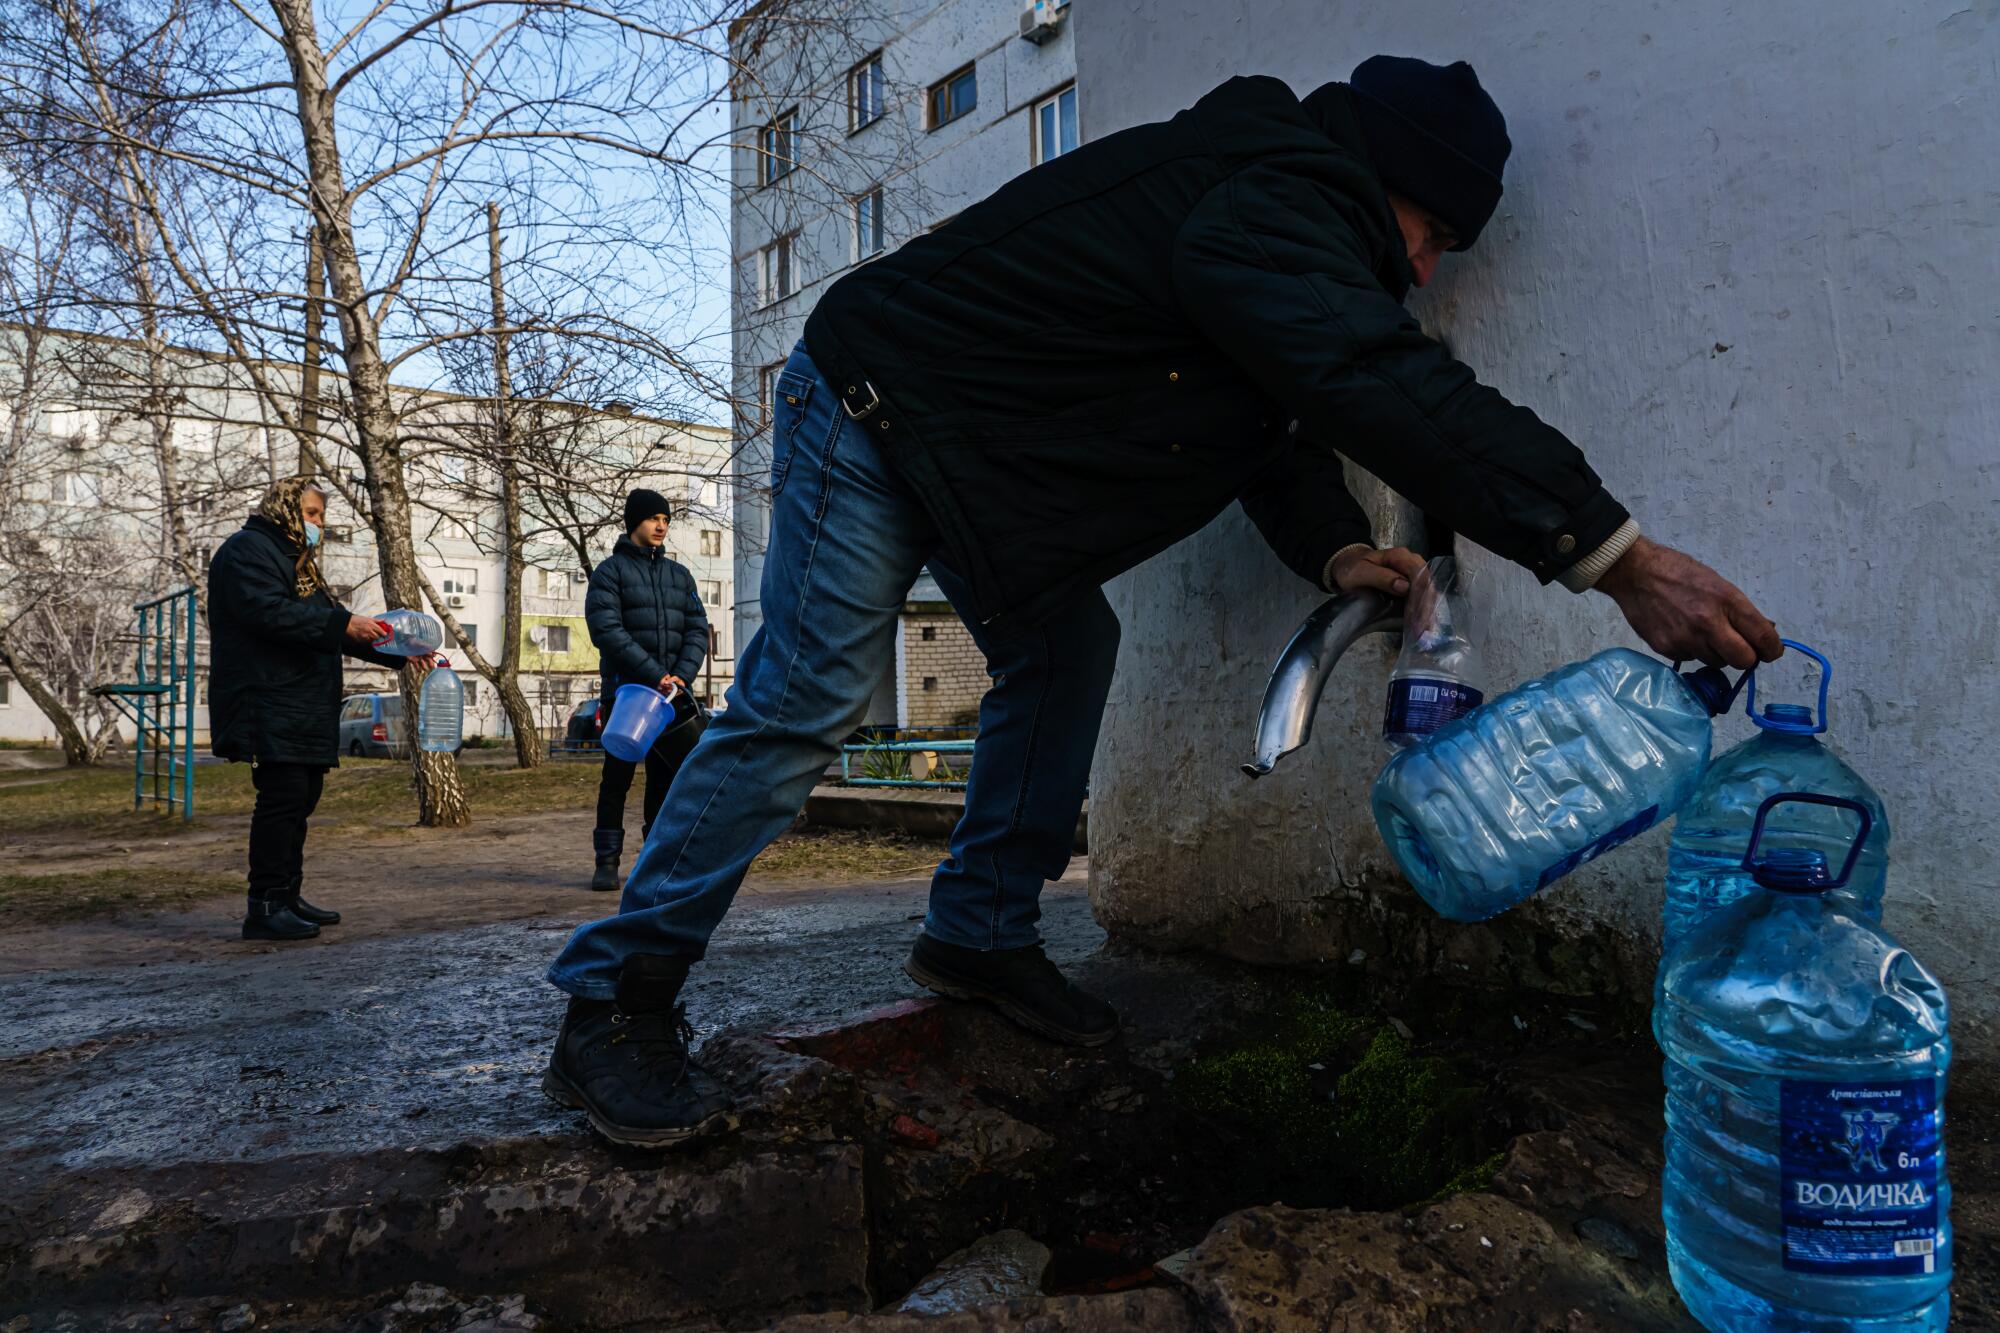 People whose water service at home has been disrupted line up to get water at a central pumping station in Schastia, Ukraine